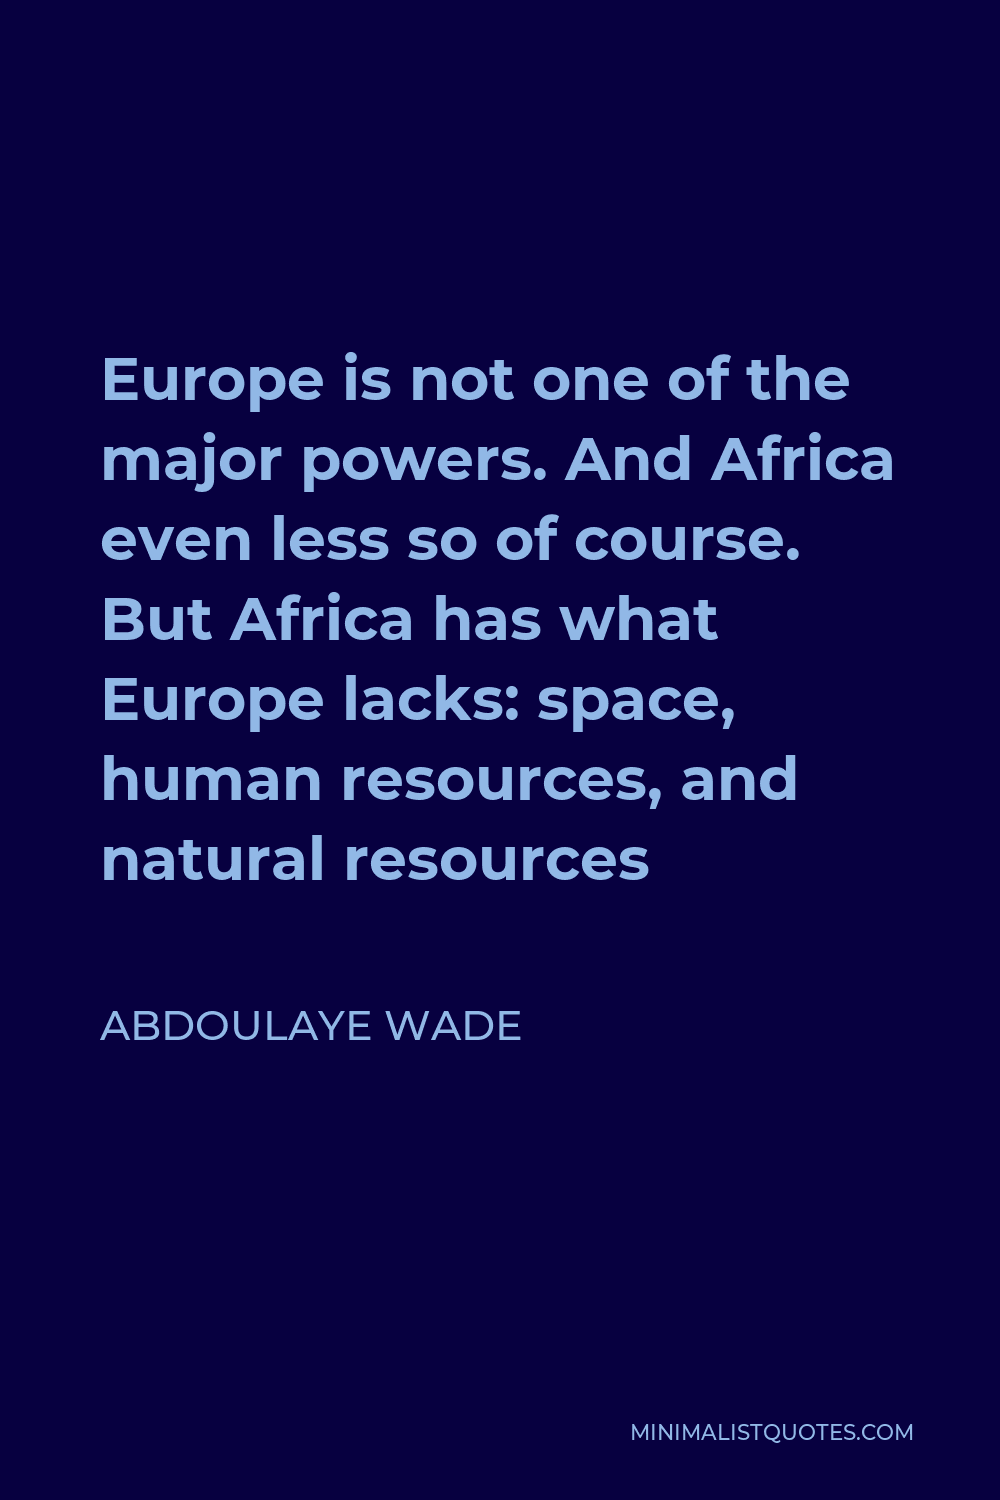 Abdoulaye Wade Quote - Europe is not one of the major powers. And Africa even less so of course. But Africa has what Europe lacks: space, human resources, and natural resources